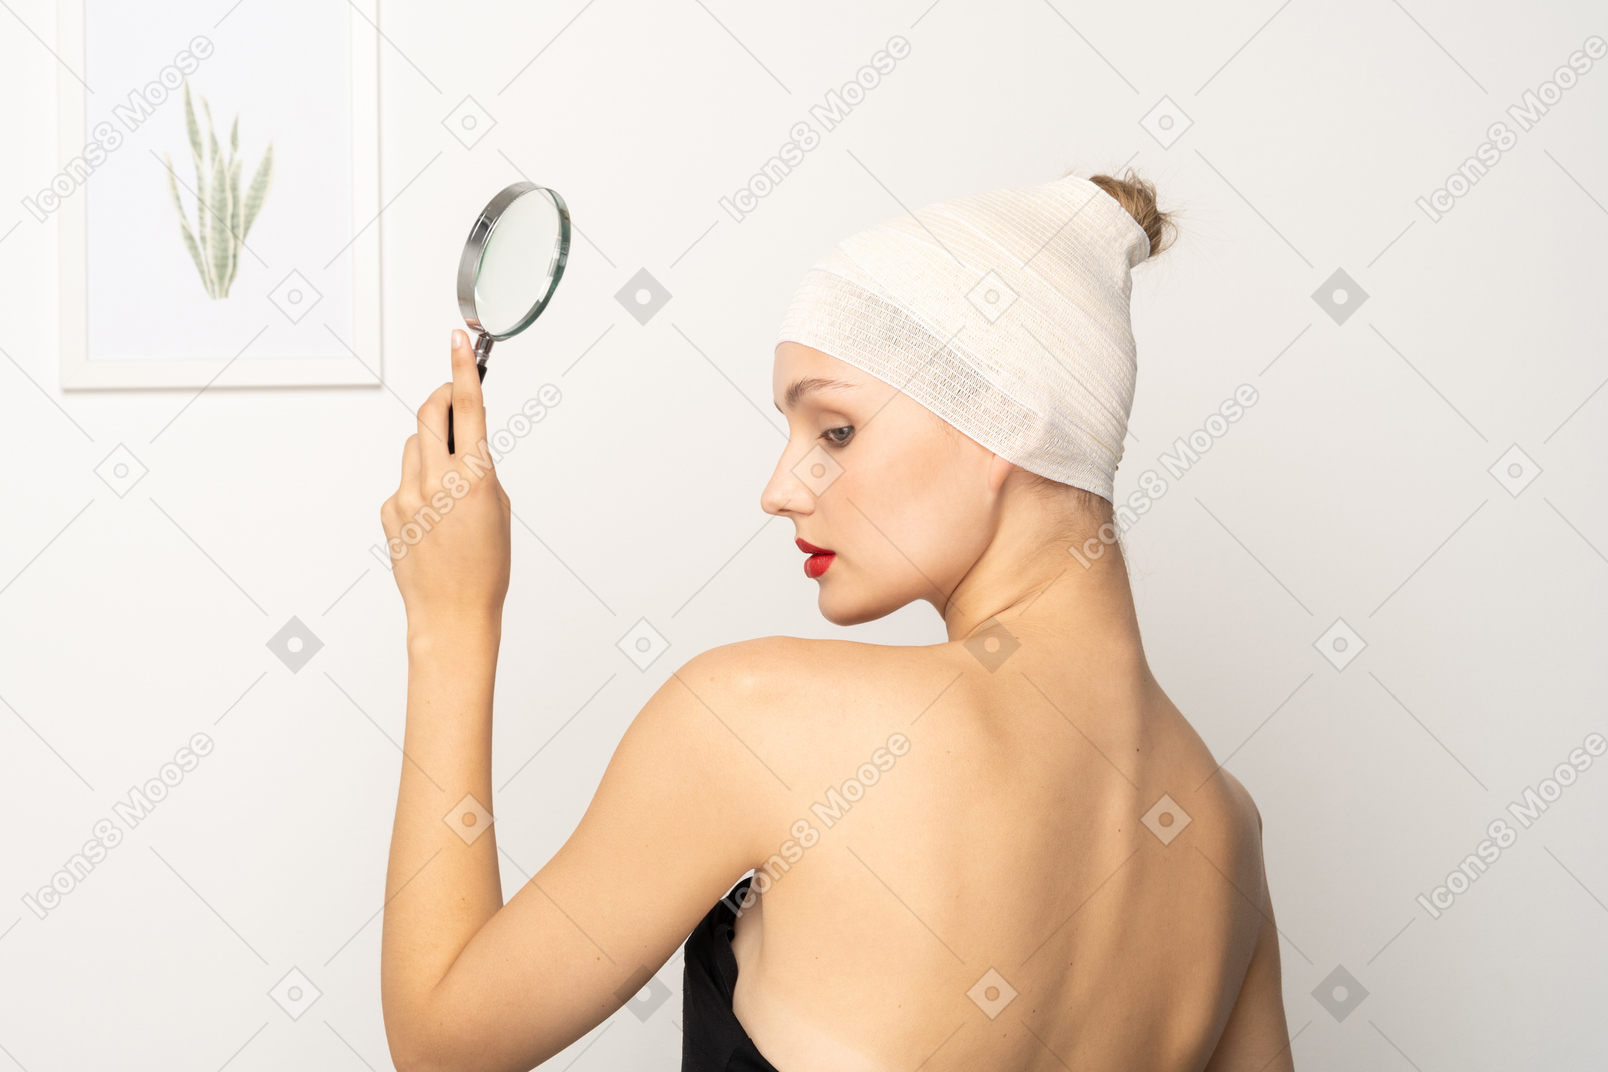 Young woman with bandaged head holding up magnifier